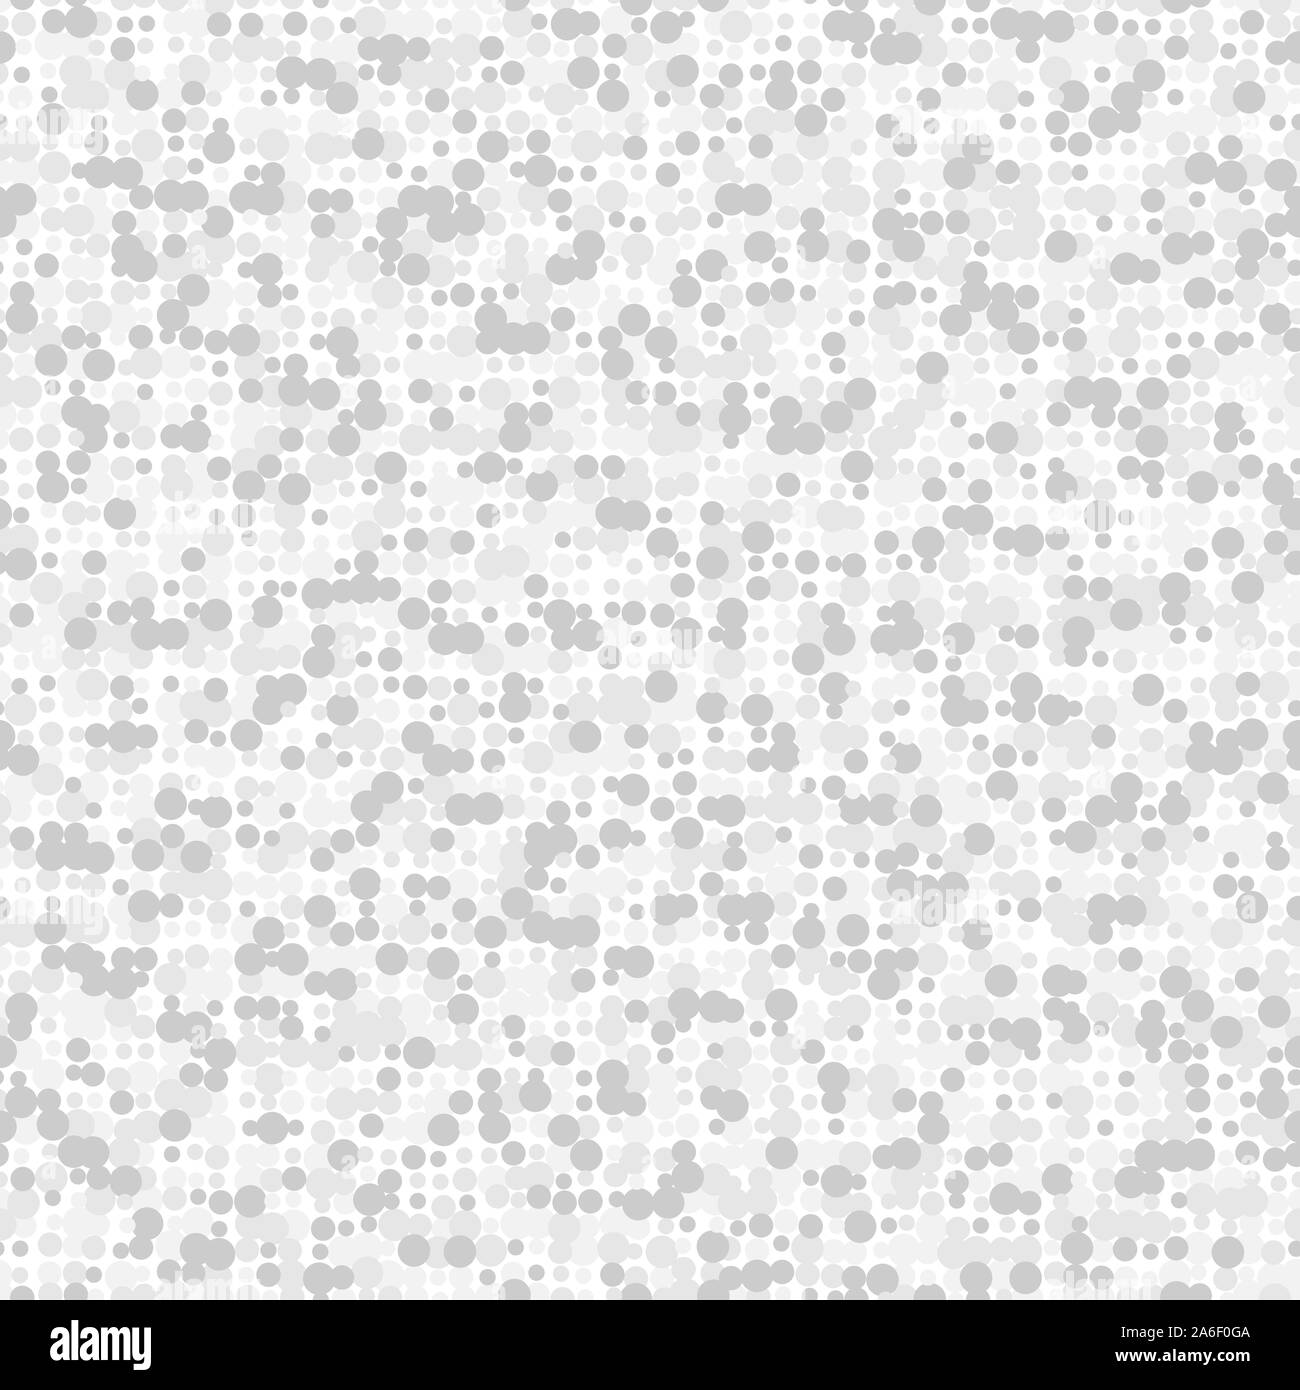 White abstract background with seamless random gray circles, dots as noise Stock Vector